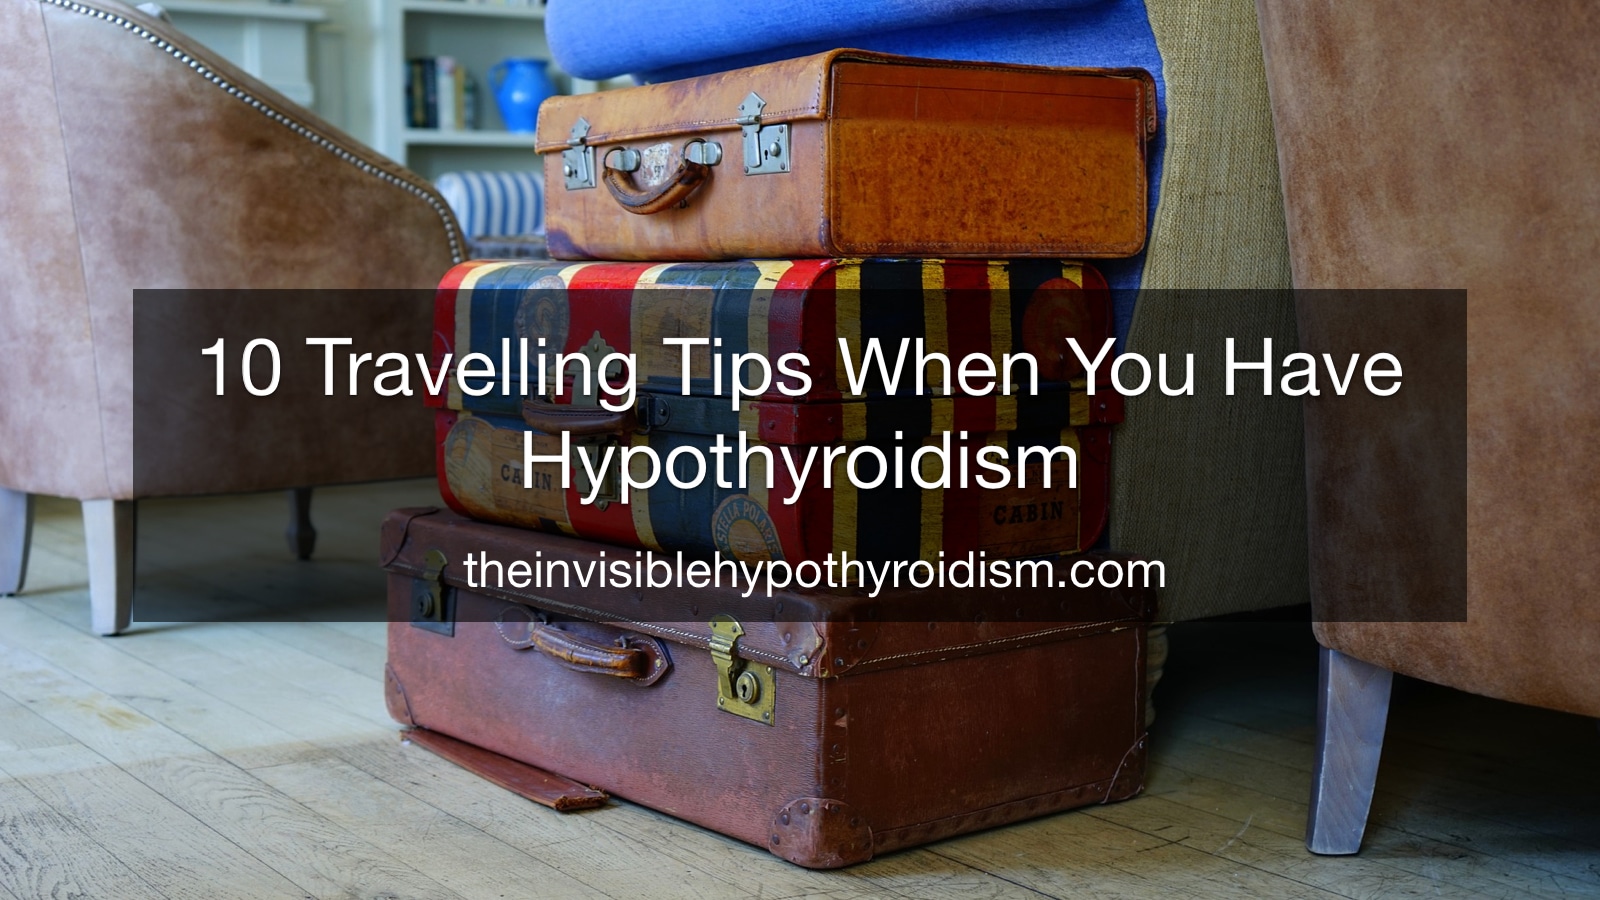 10 Travelling Tips When You Have Hypothyroidism